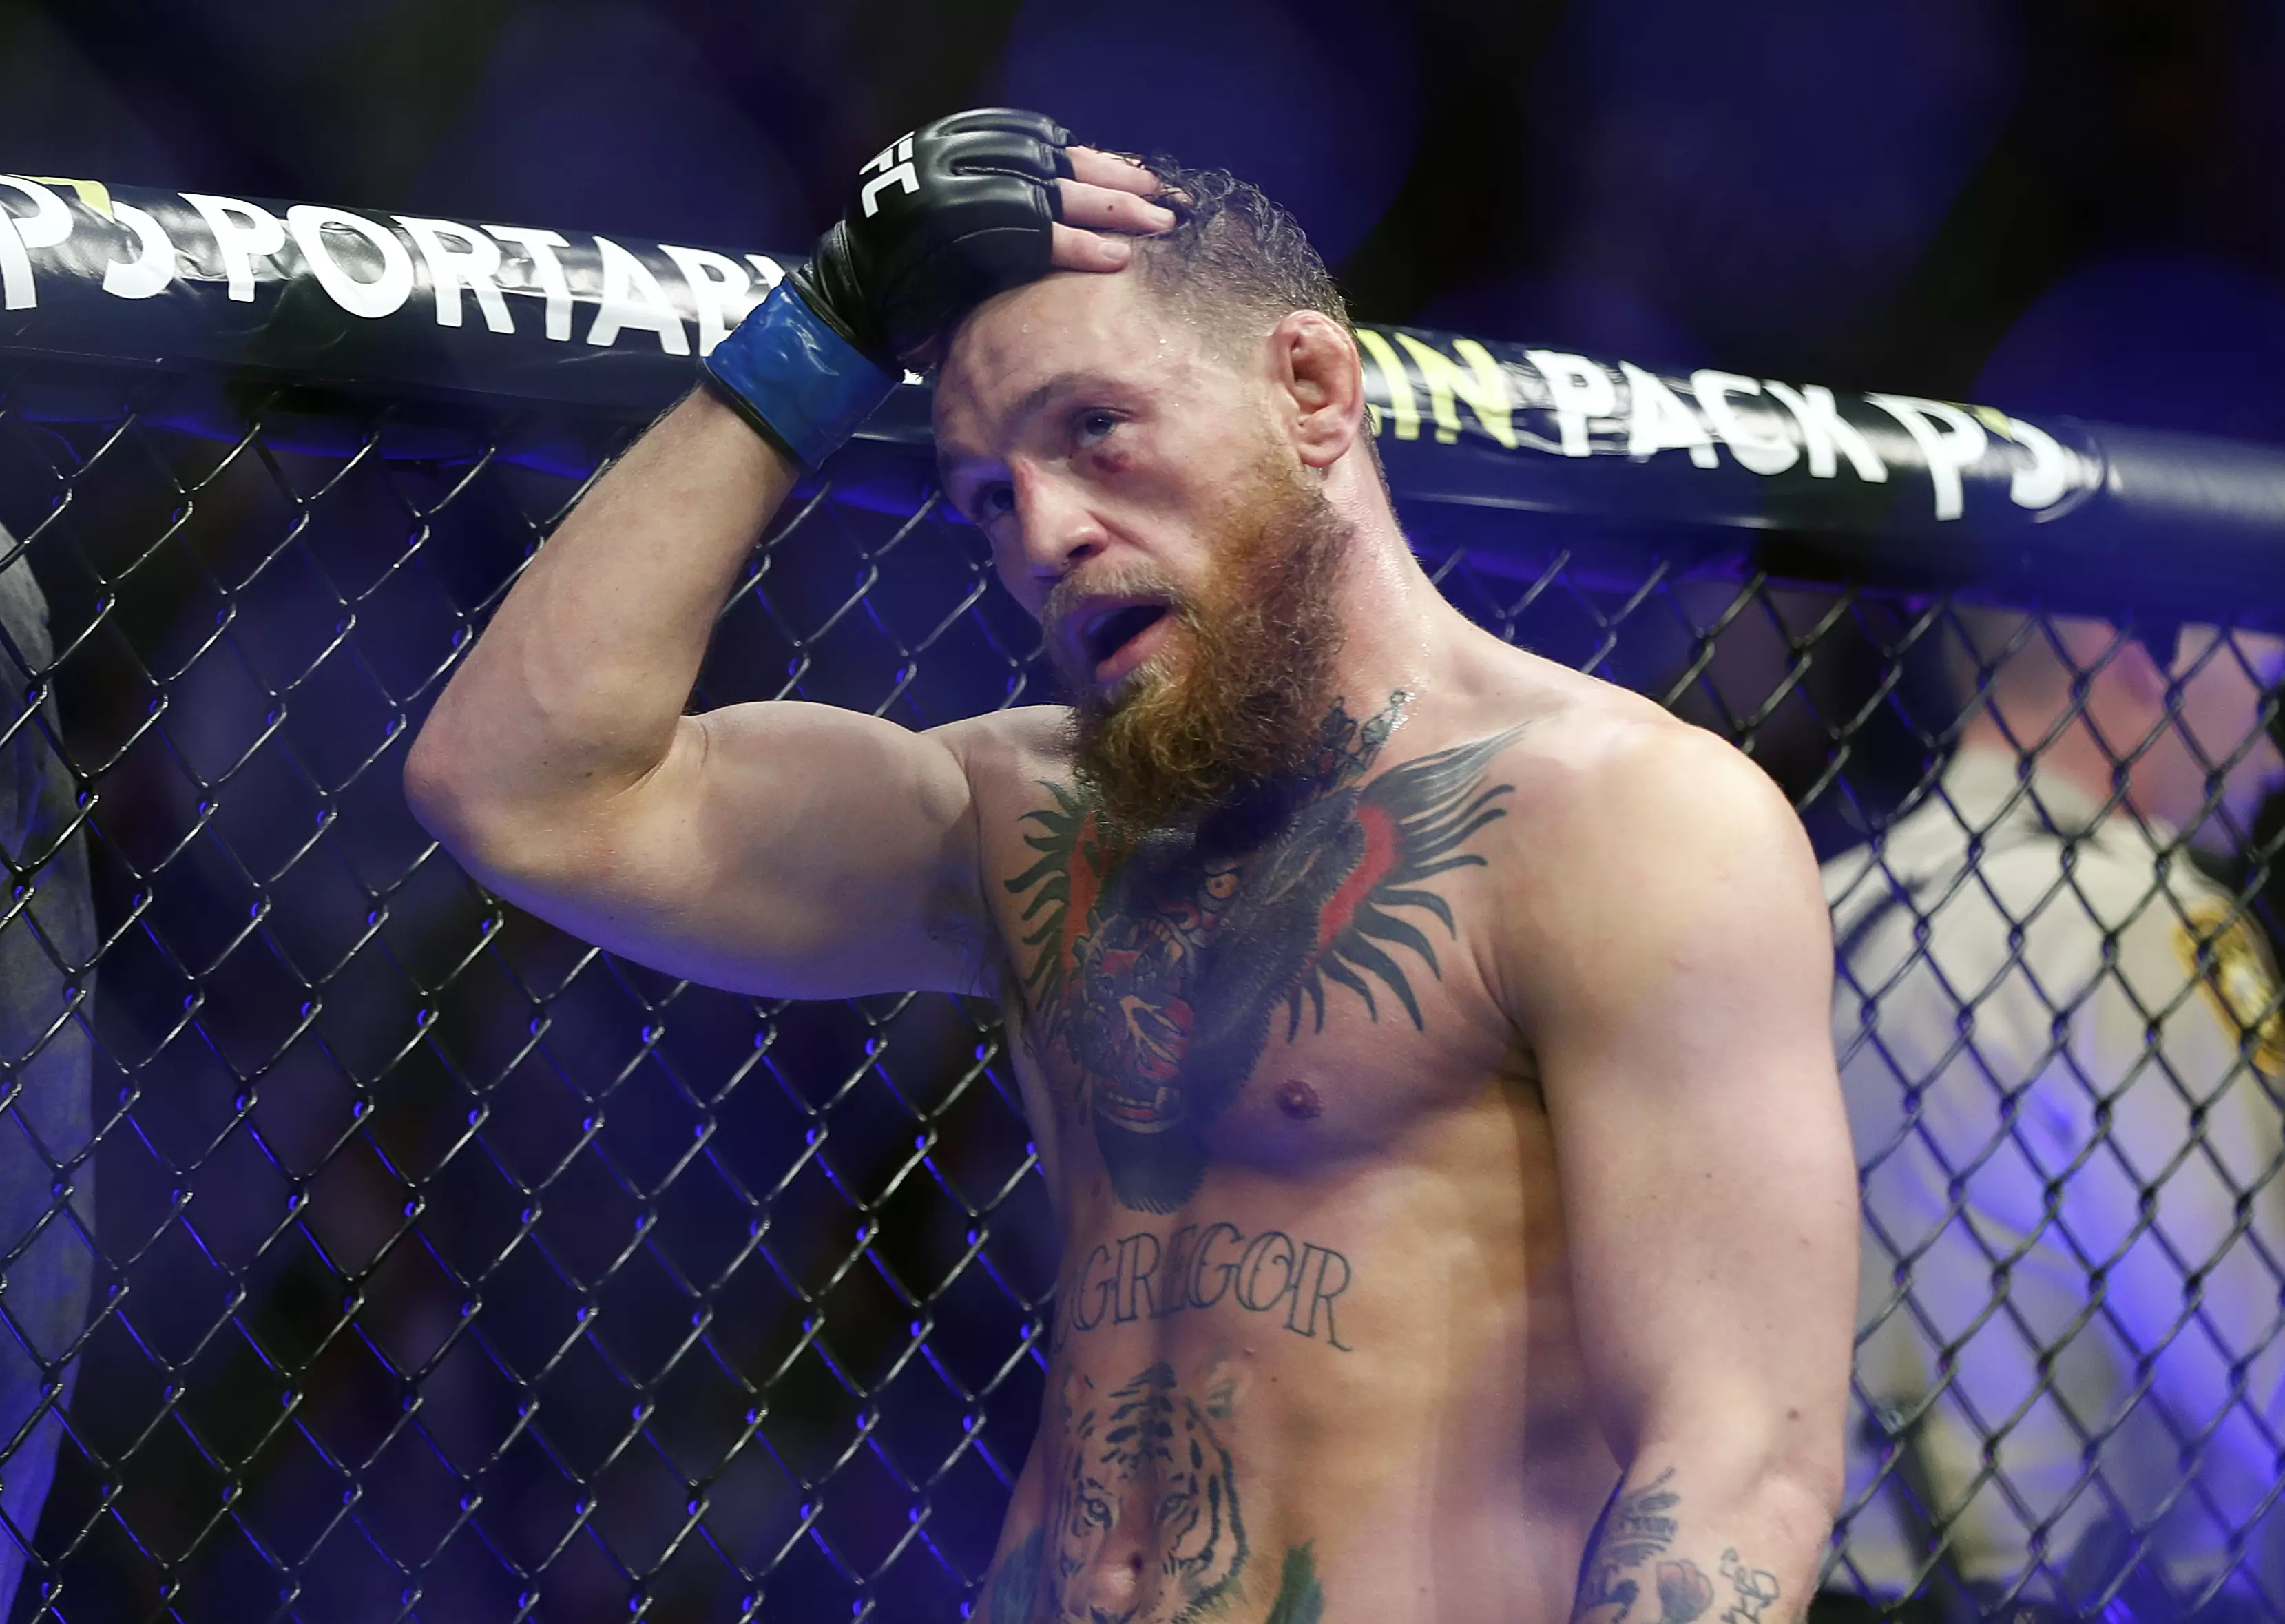 Clearly McGregor's injury was from Khabib as he's already showing signs of the black eye post fight. Image: PA Images